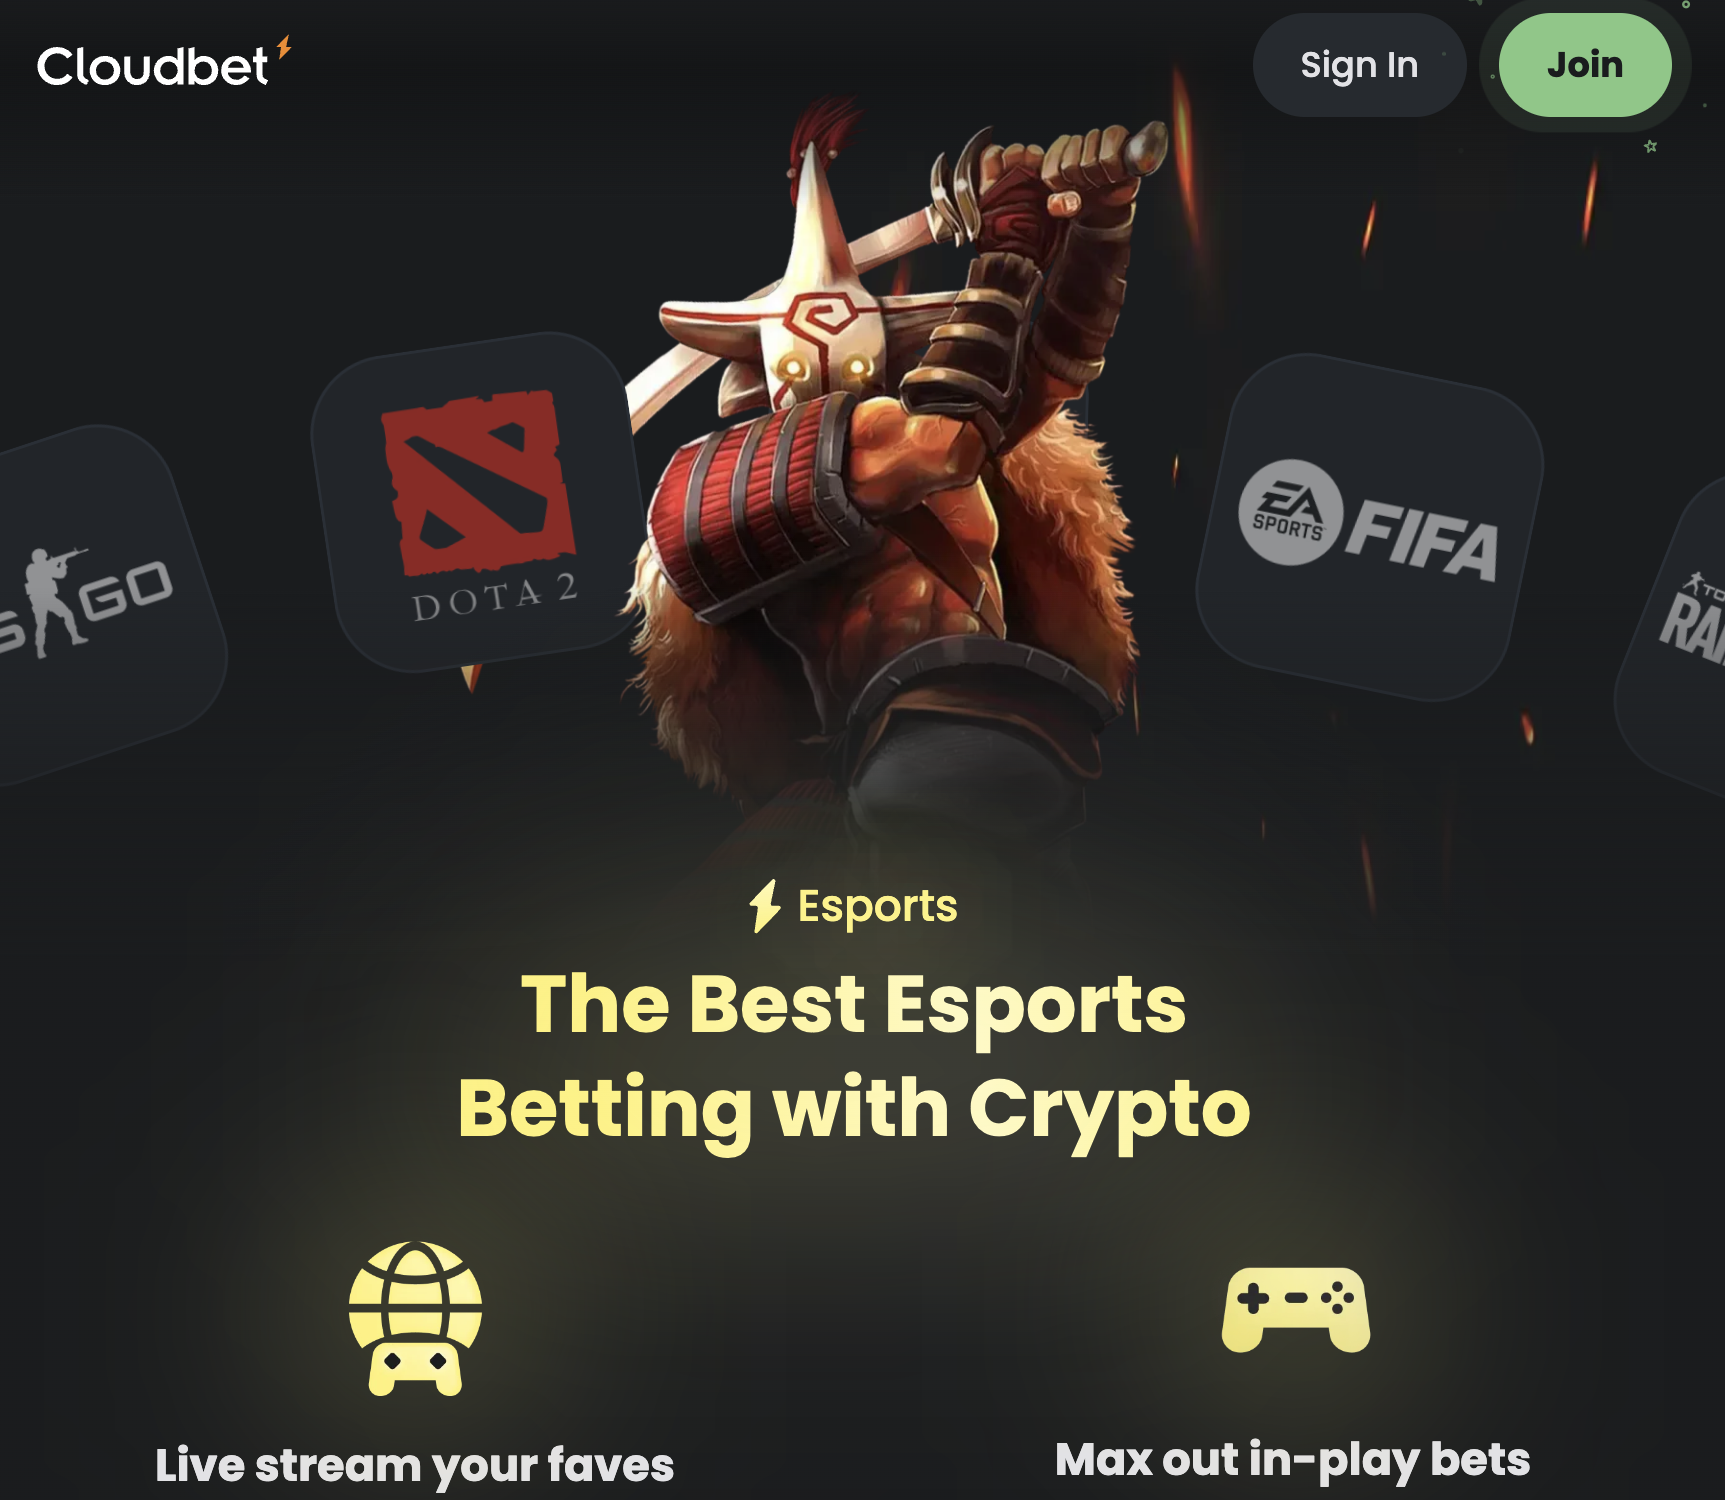 Cloudbet - Esports Betting Platform Supporting 10 Leagues